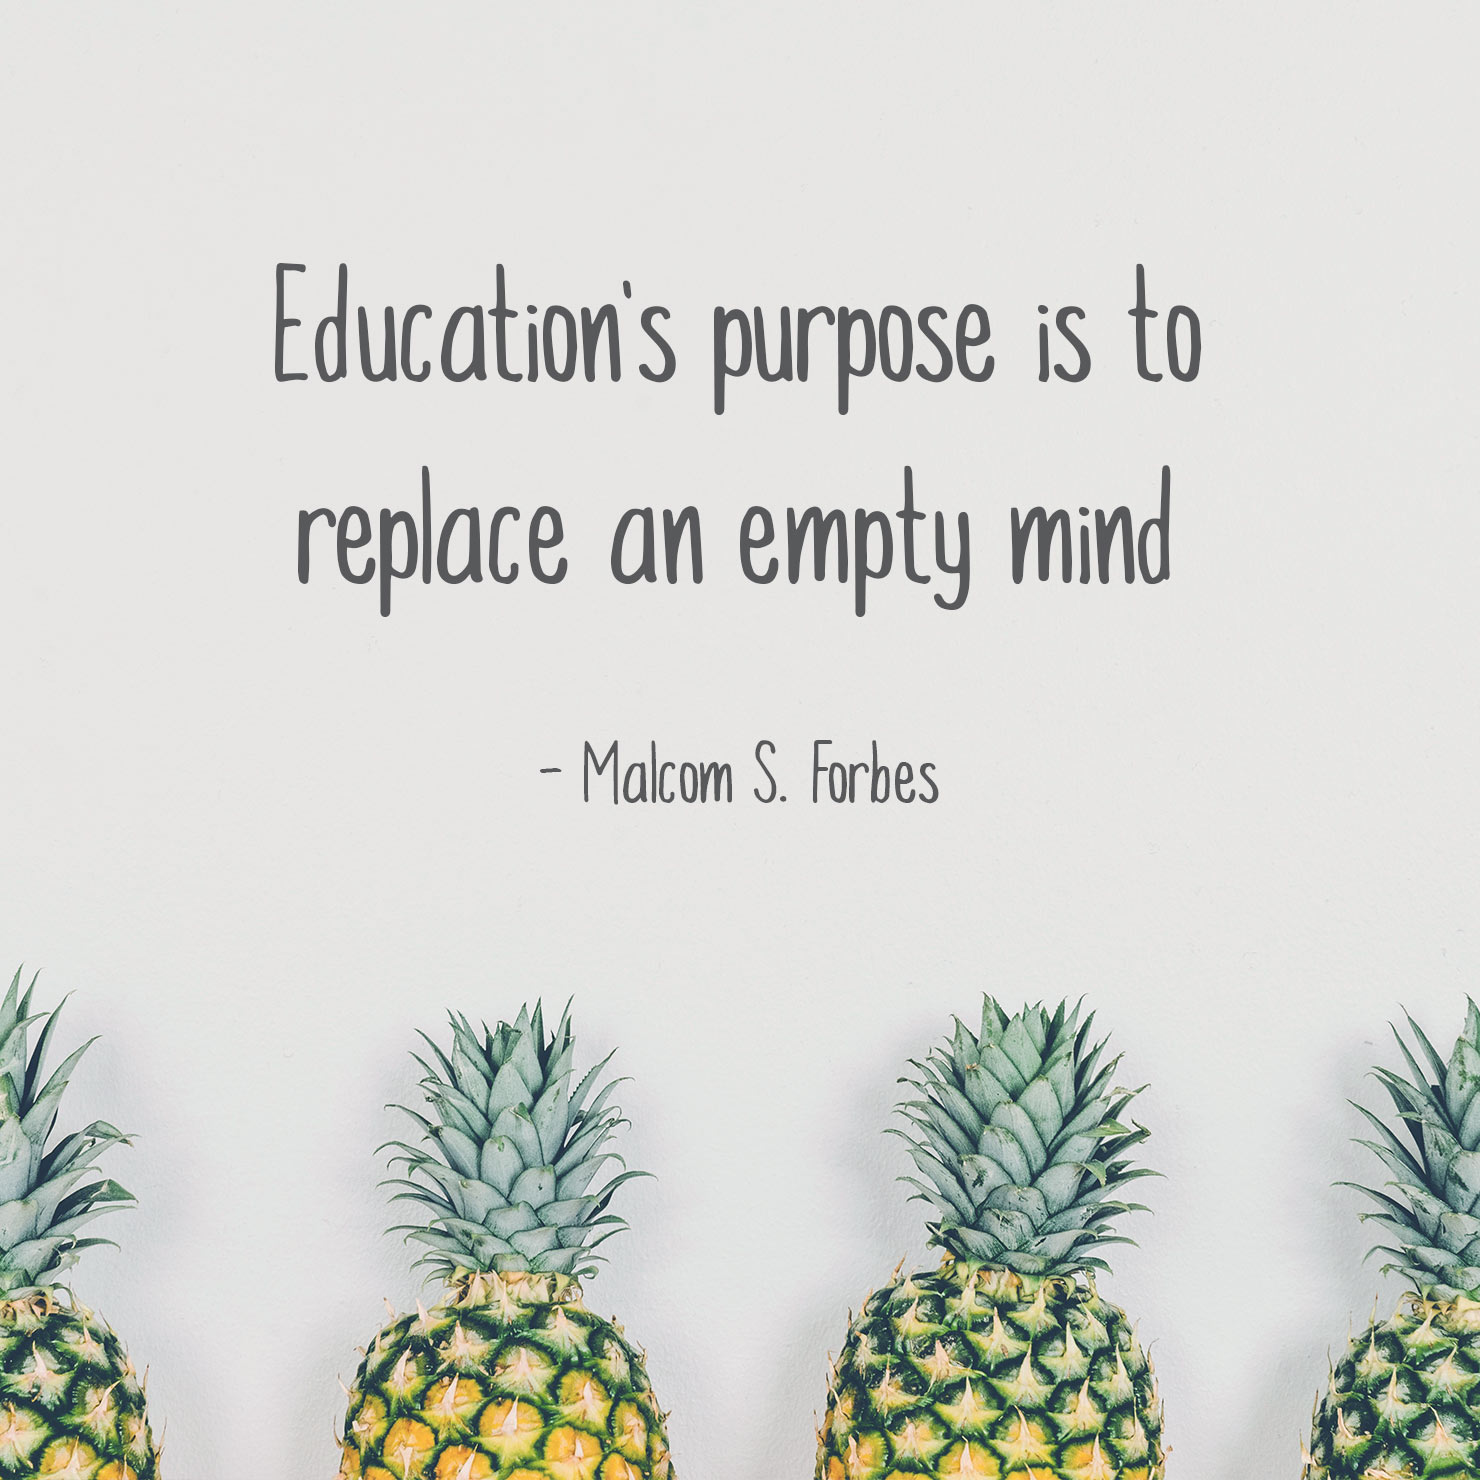 for cards graduation quote: Education's purpose is to replace an empty mind - Malcom S. Forbes